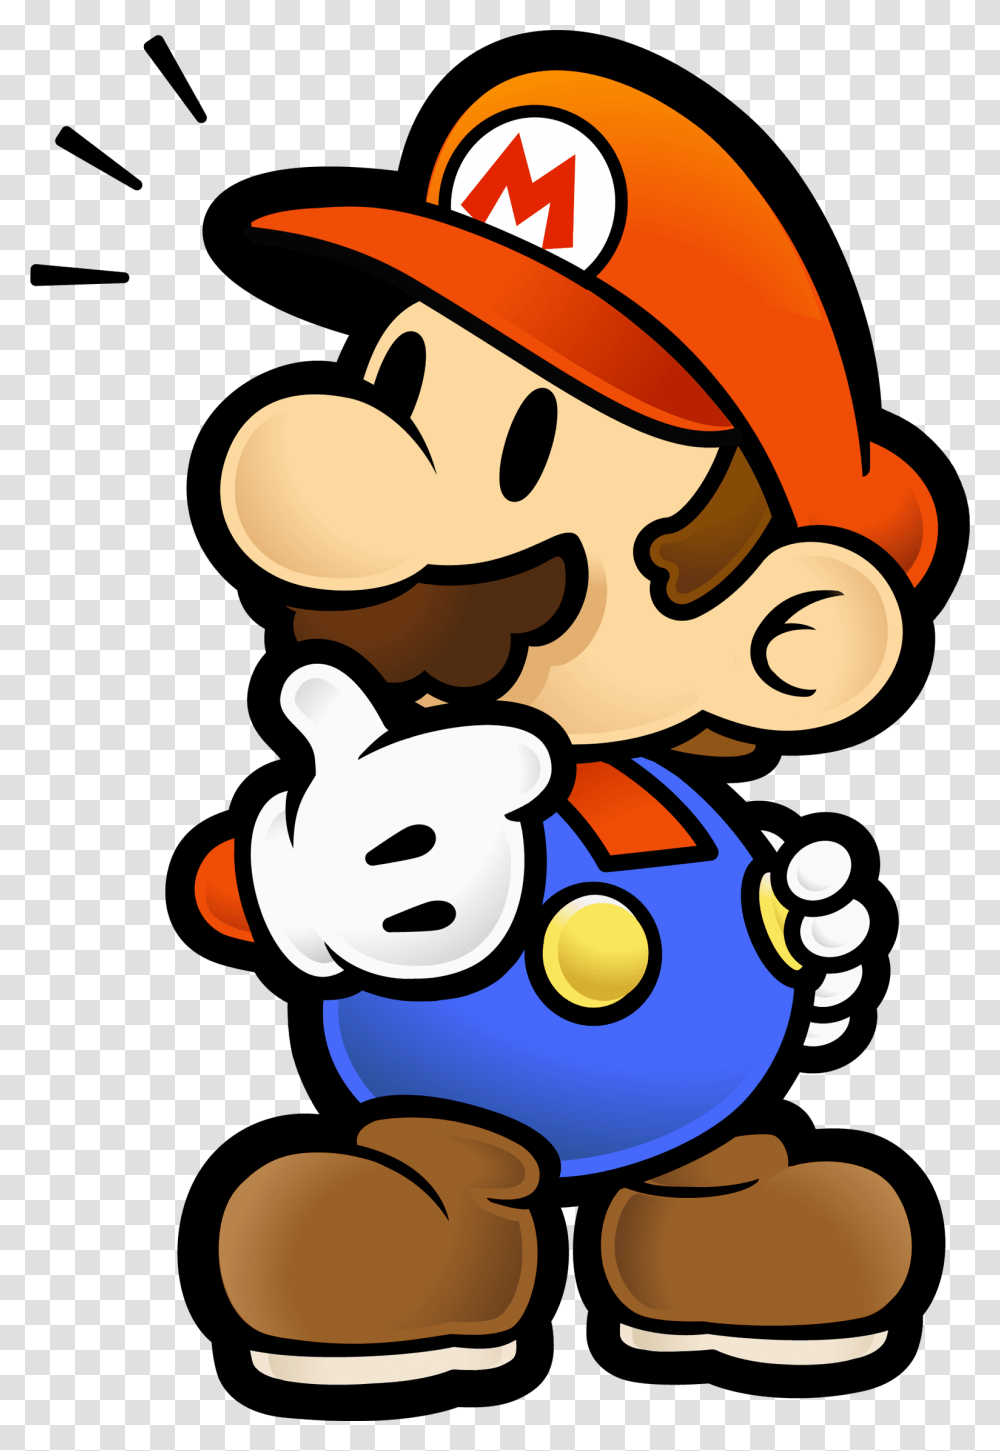 Paper Mario 2 Gamecube Game Download Paper Mario Thinking, Super Mario, Angry Birds Transparent Png